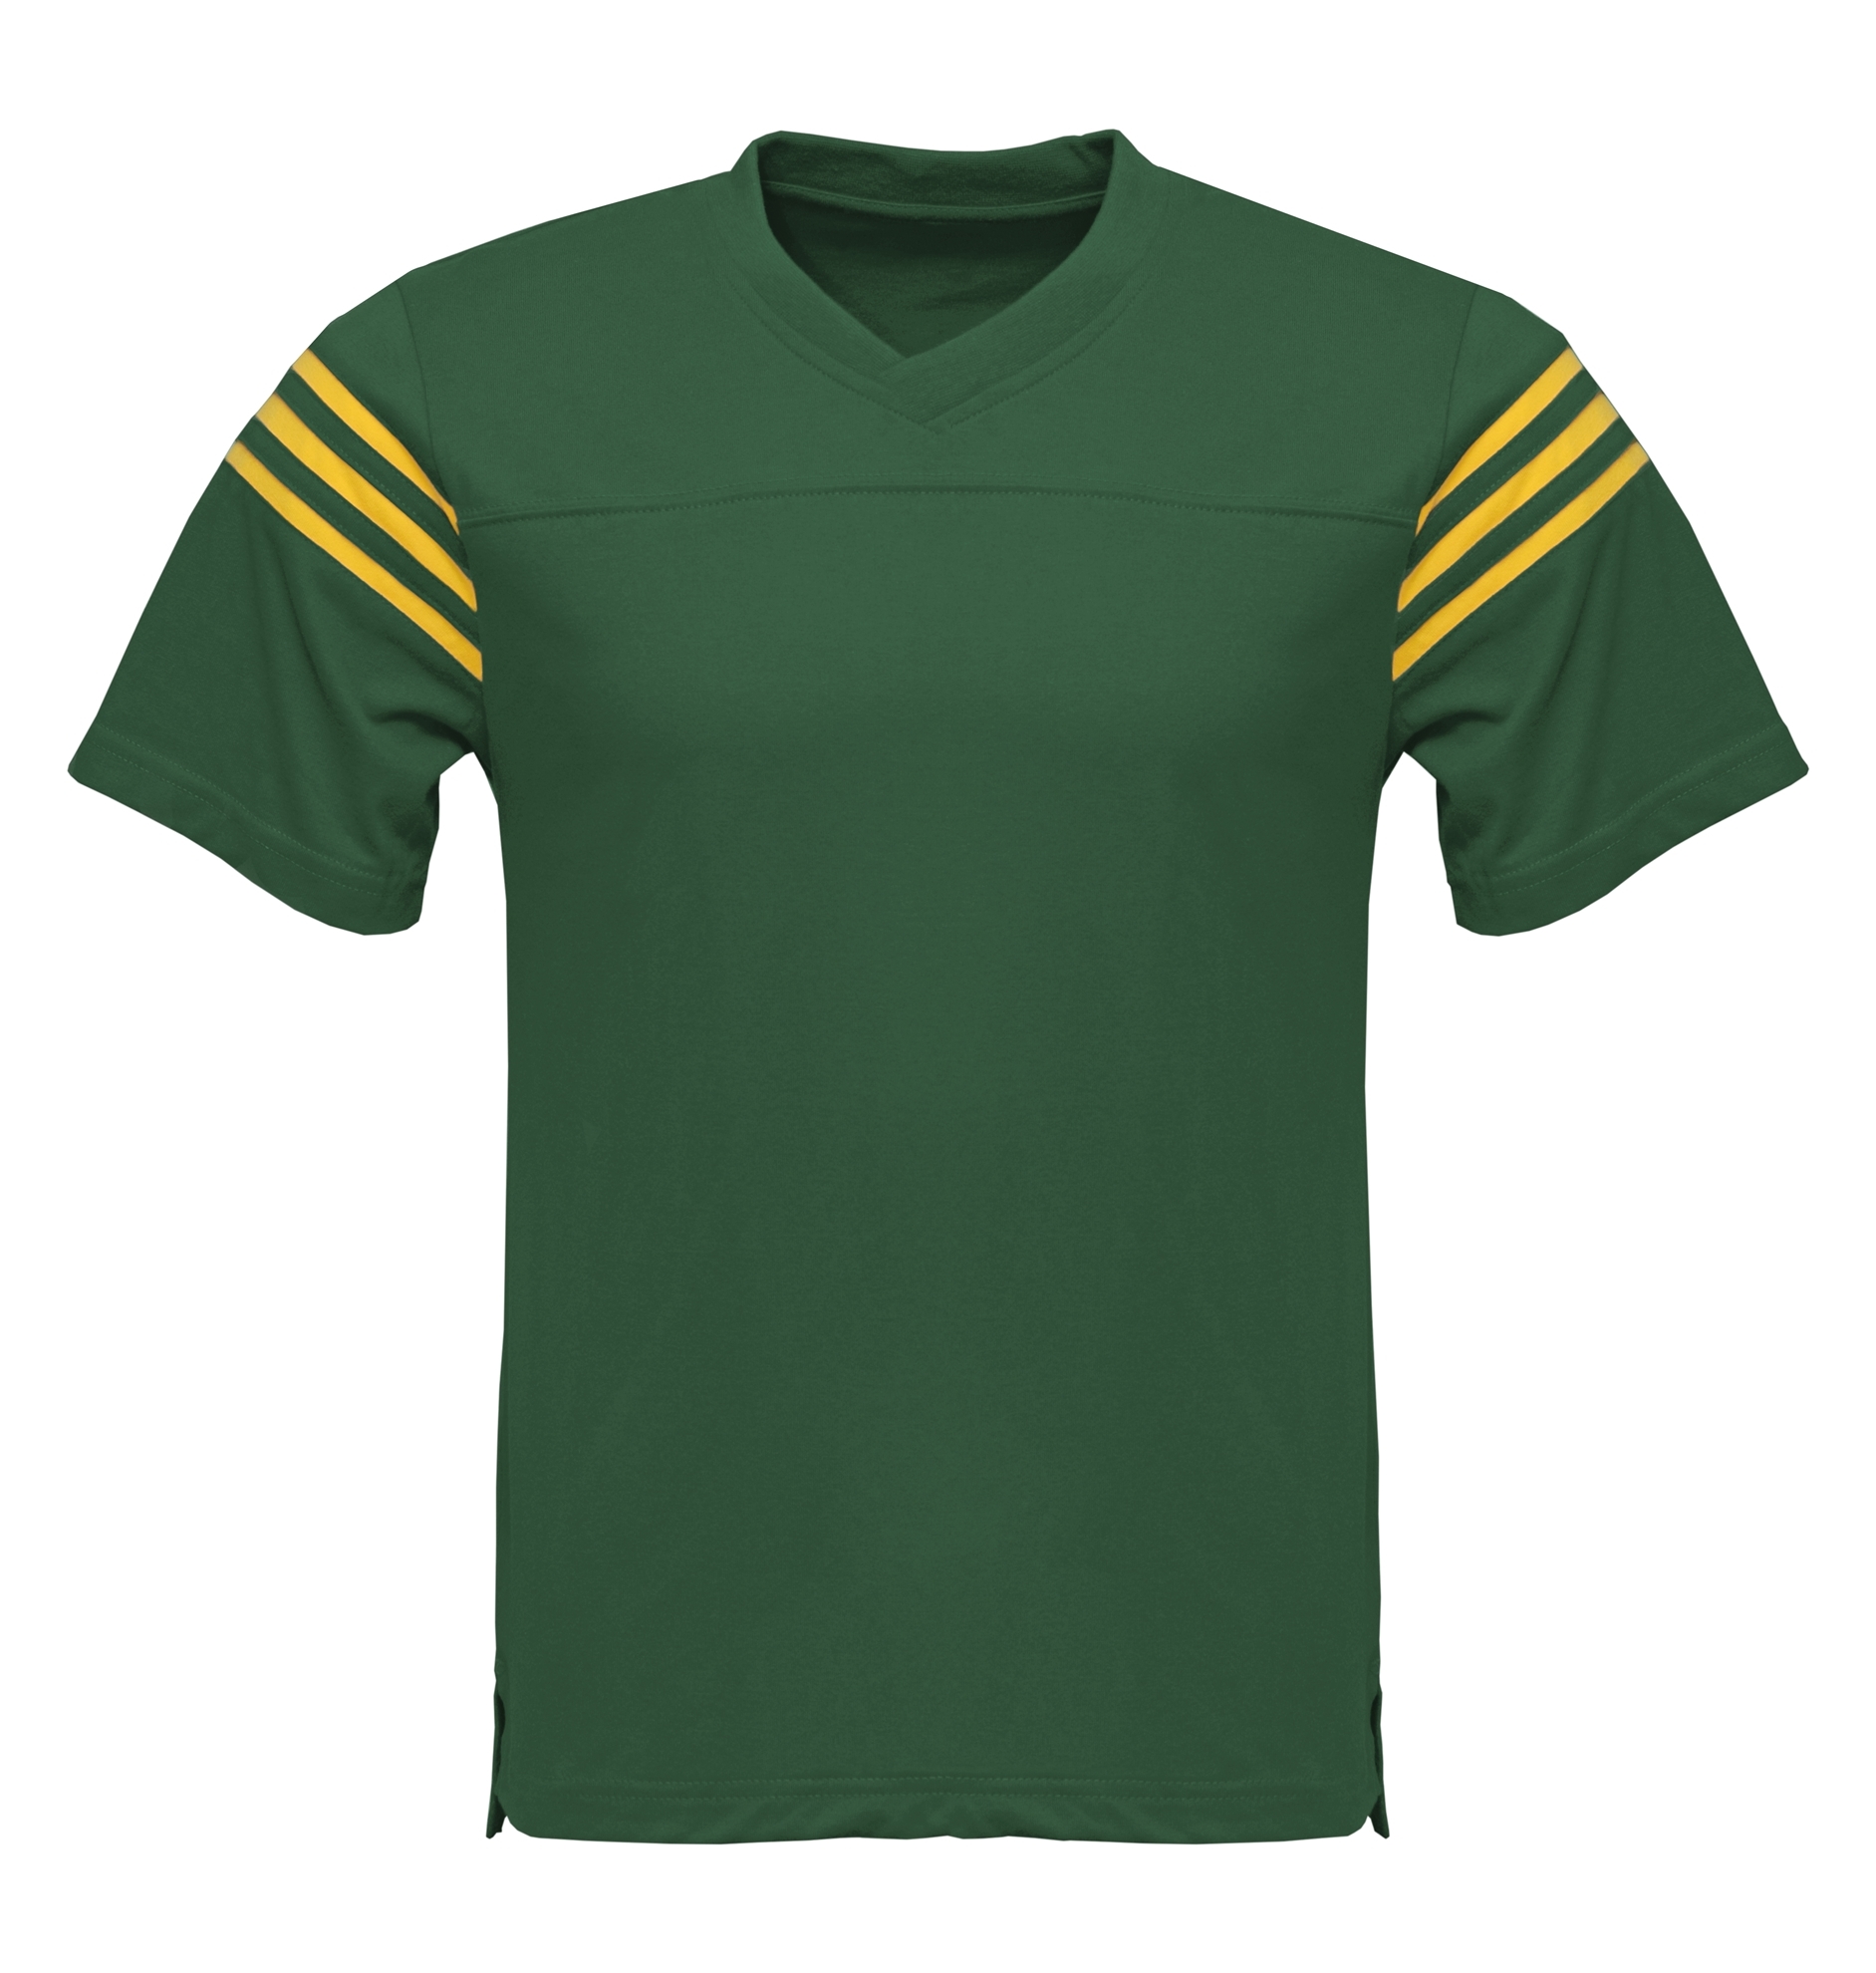 click to view DK.GREEN/GOLD